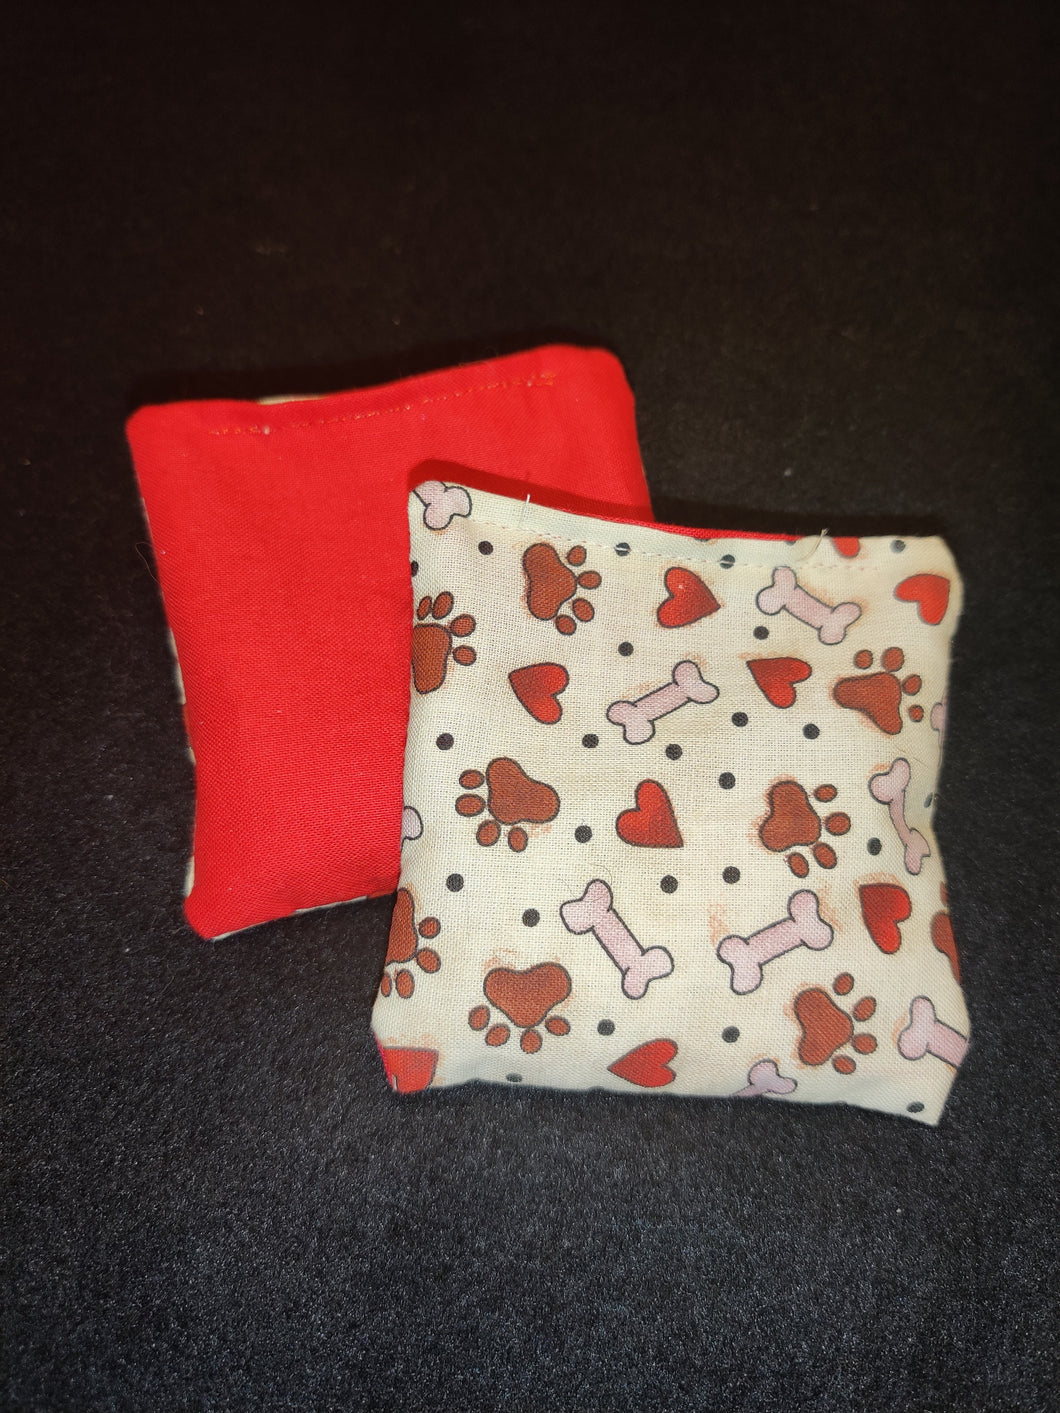 HAND WARMER PAIR (Small-Kids) - Dogs, Paws, Bones & Hearts Cotton::Red Cotton